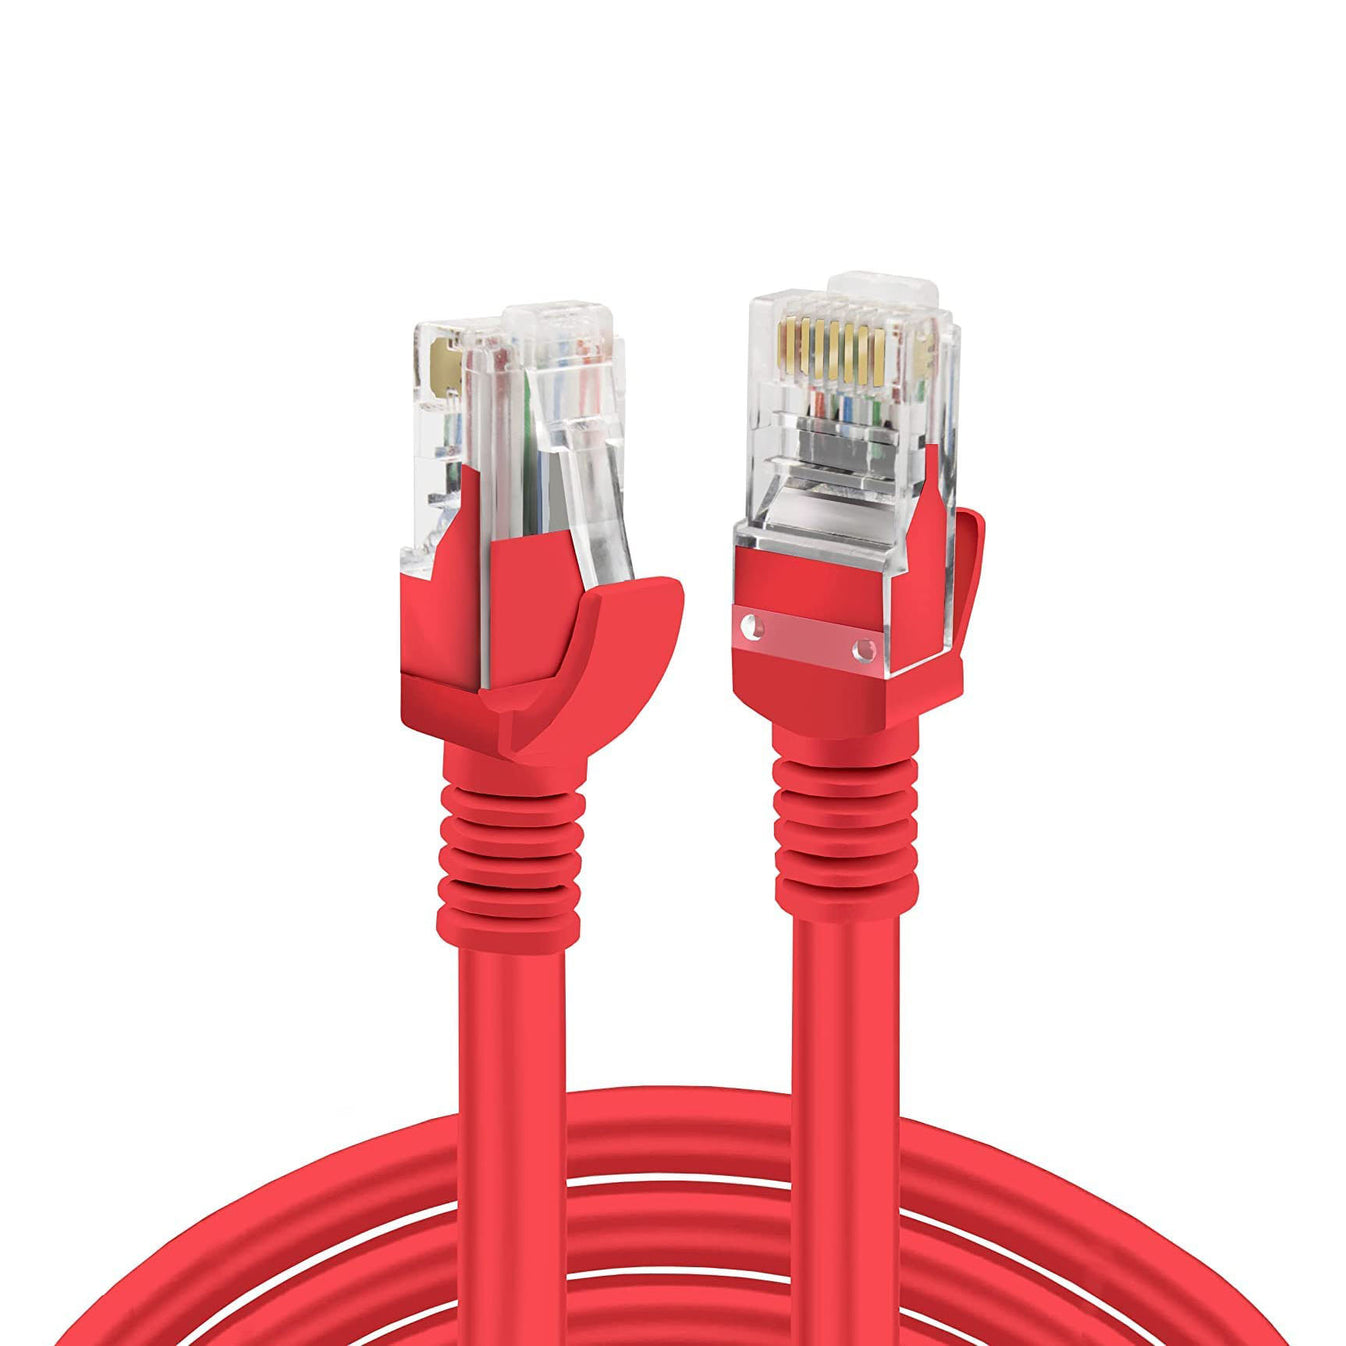 S-TEK High Speed RJ45 CAT-6 Ethernet Patch Cord – Red